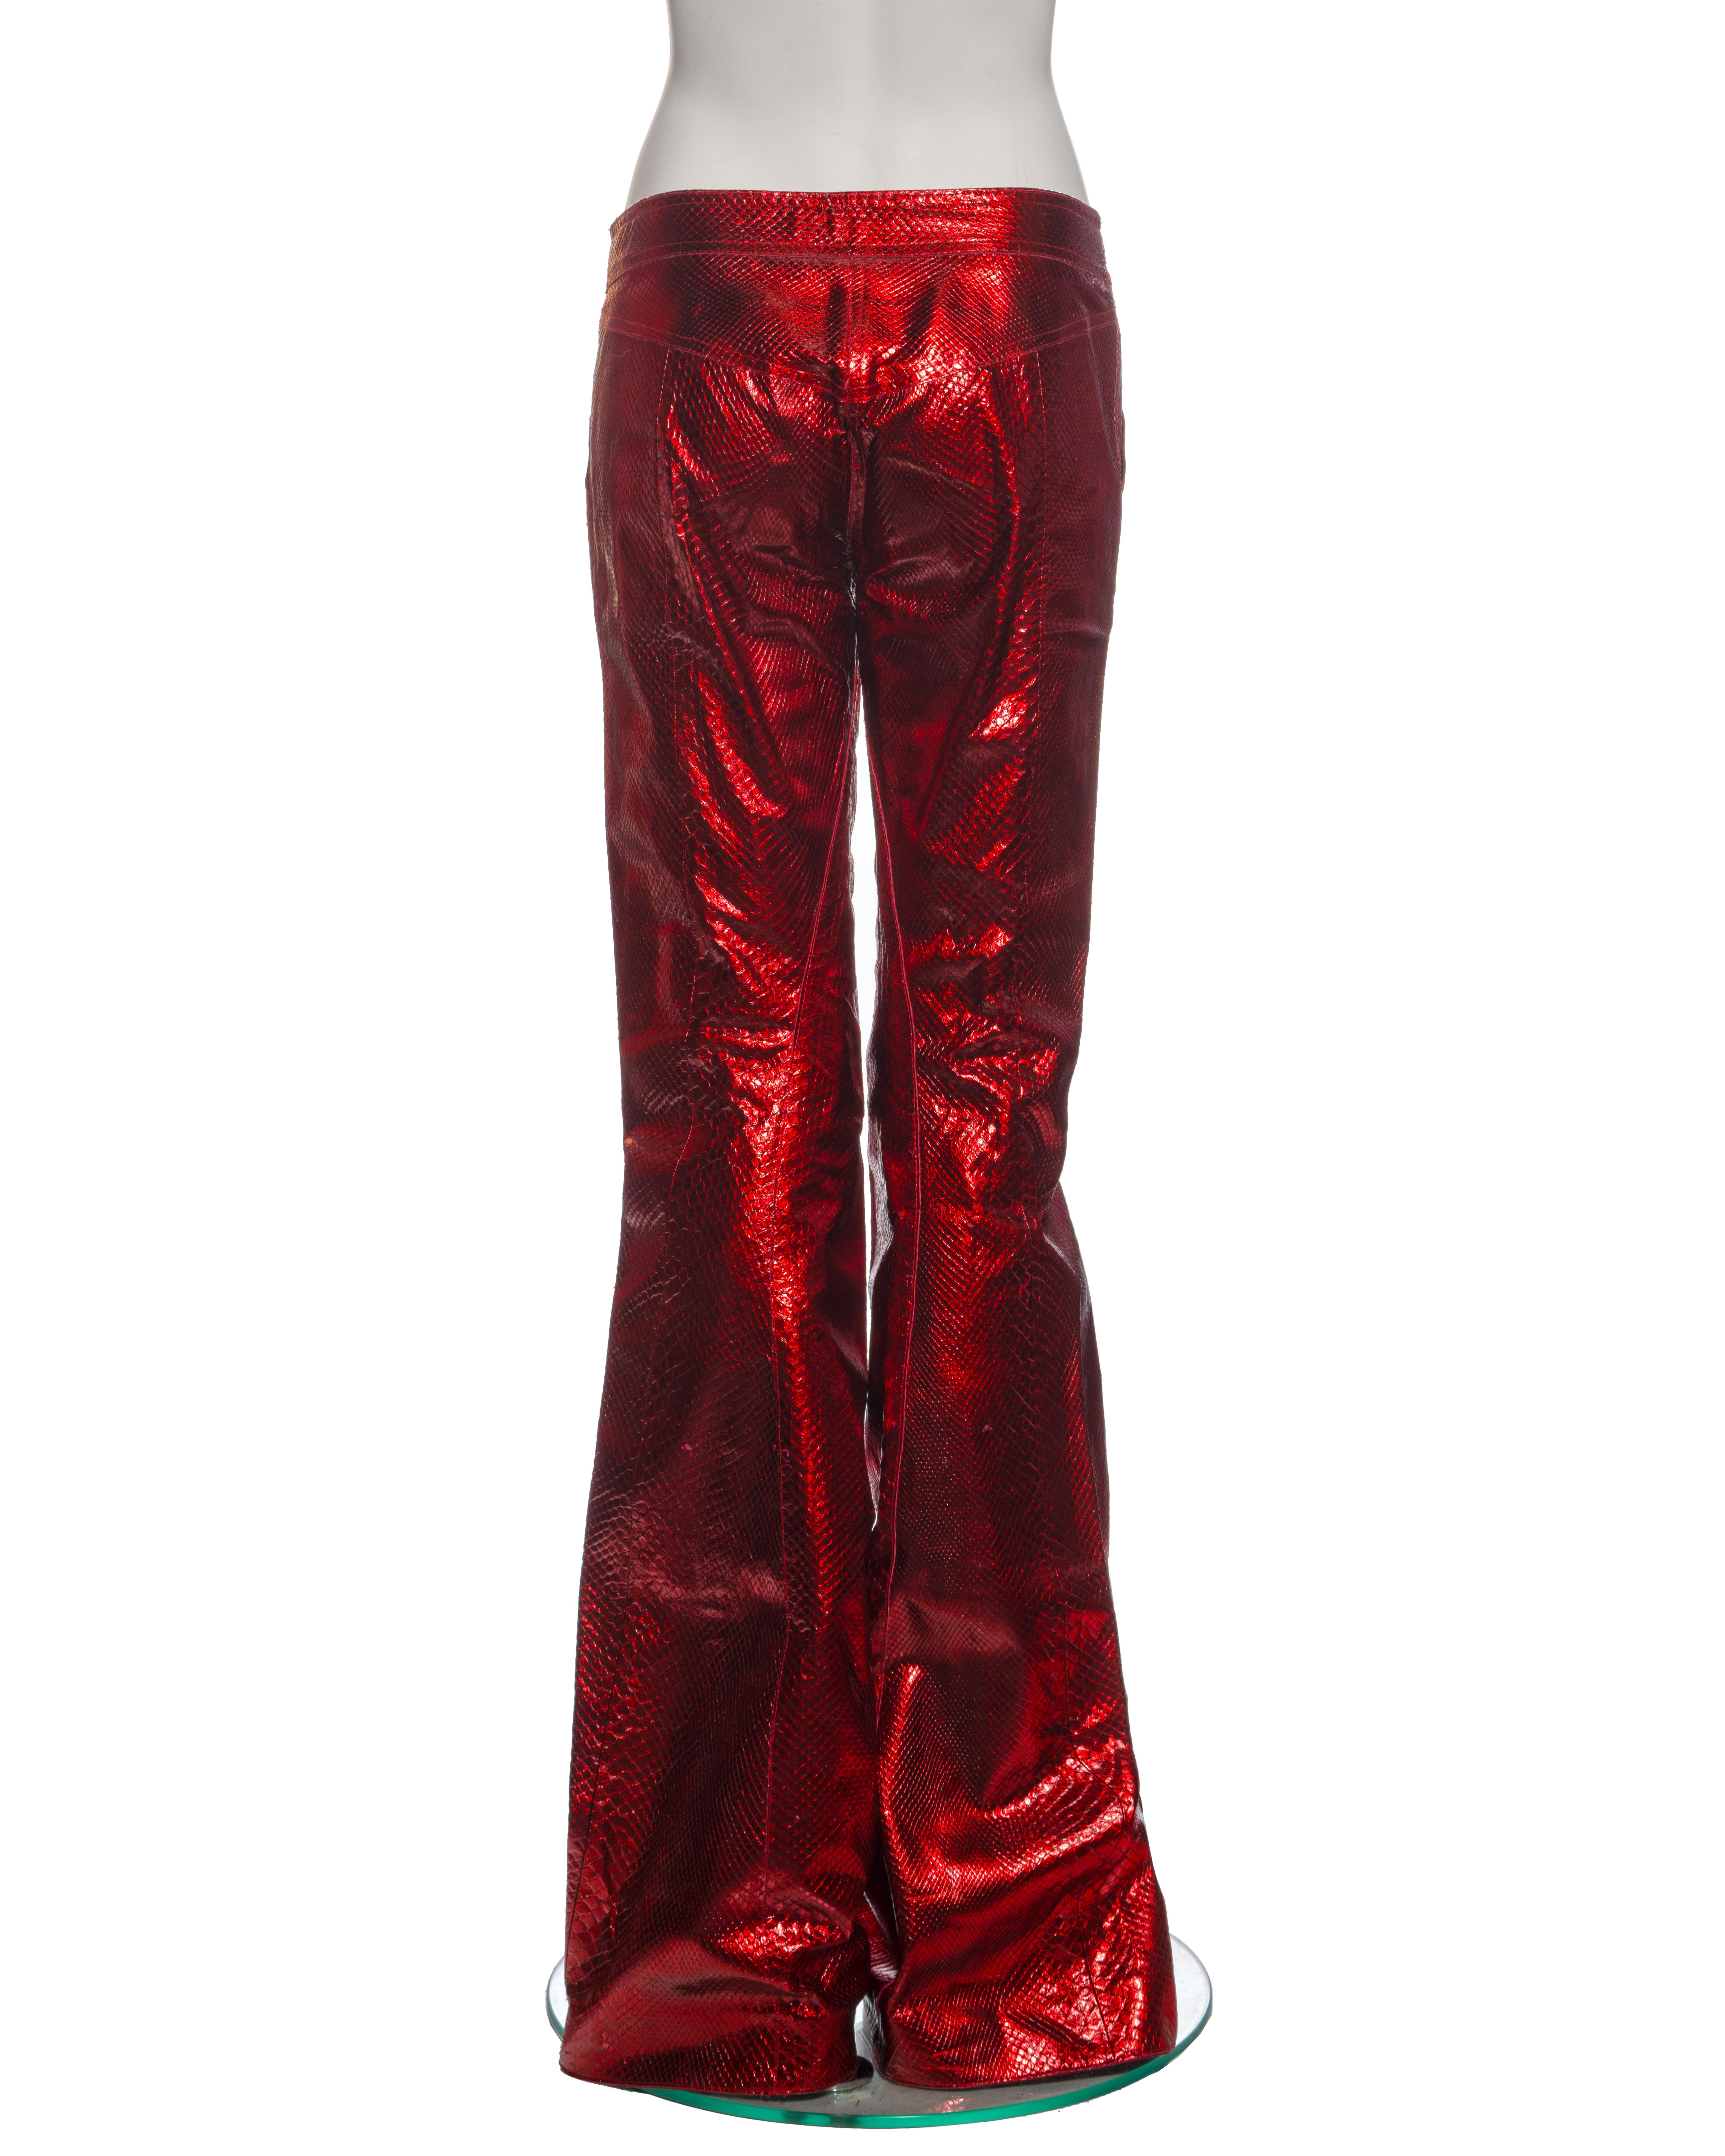 Christian Dior by John Galliano Metallic Red Python Flared Trousers, ss 2002 For Sale 3